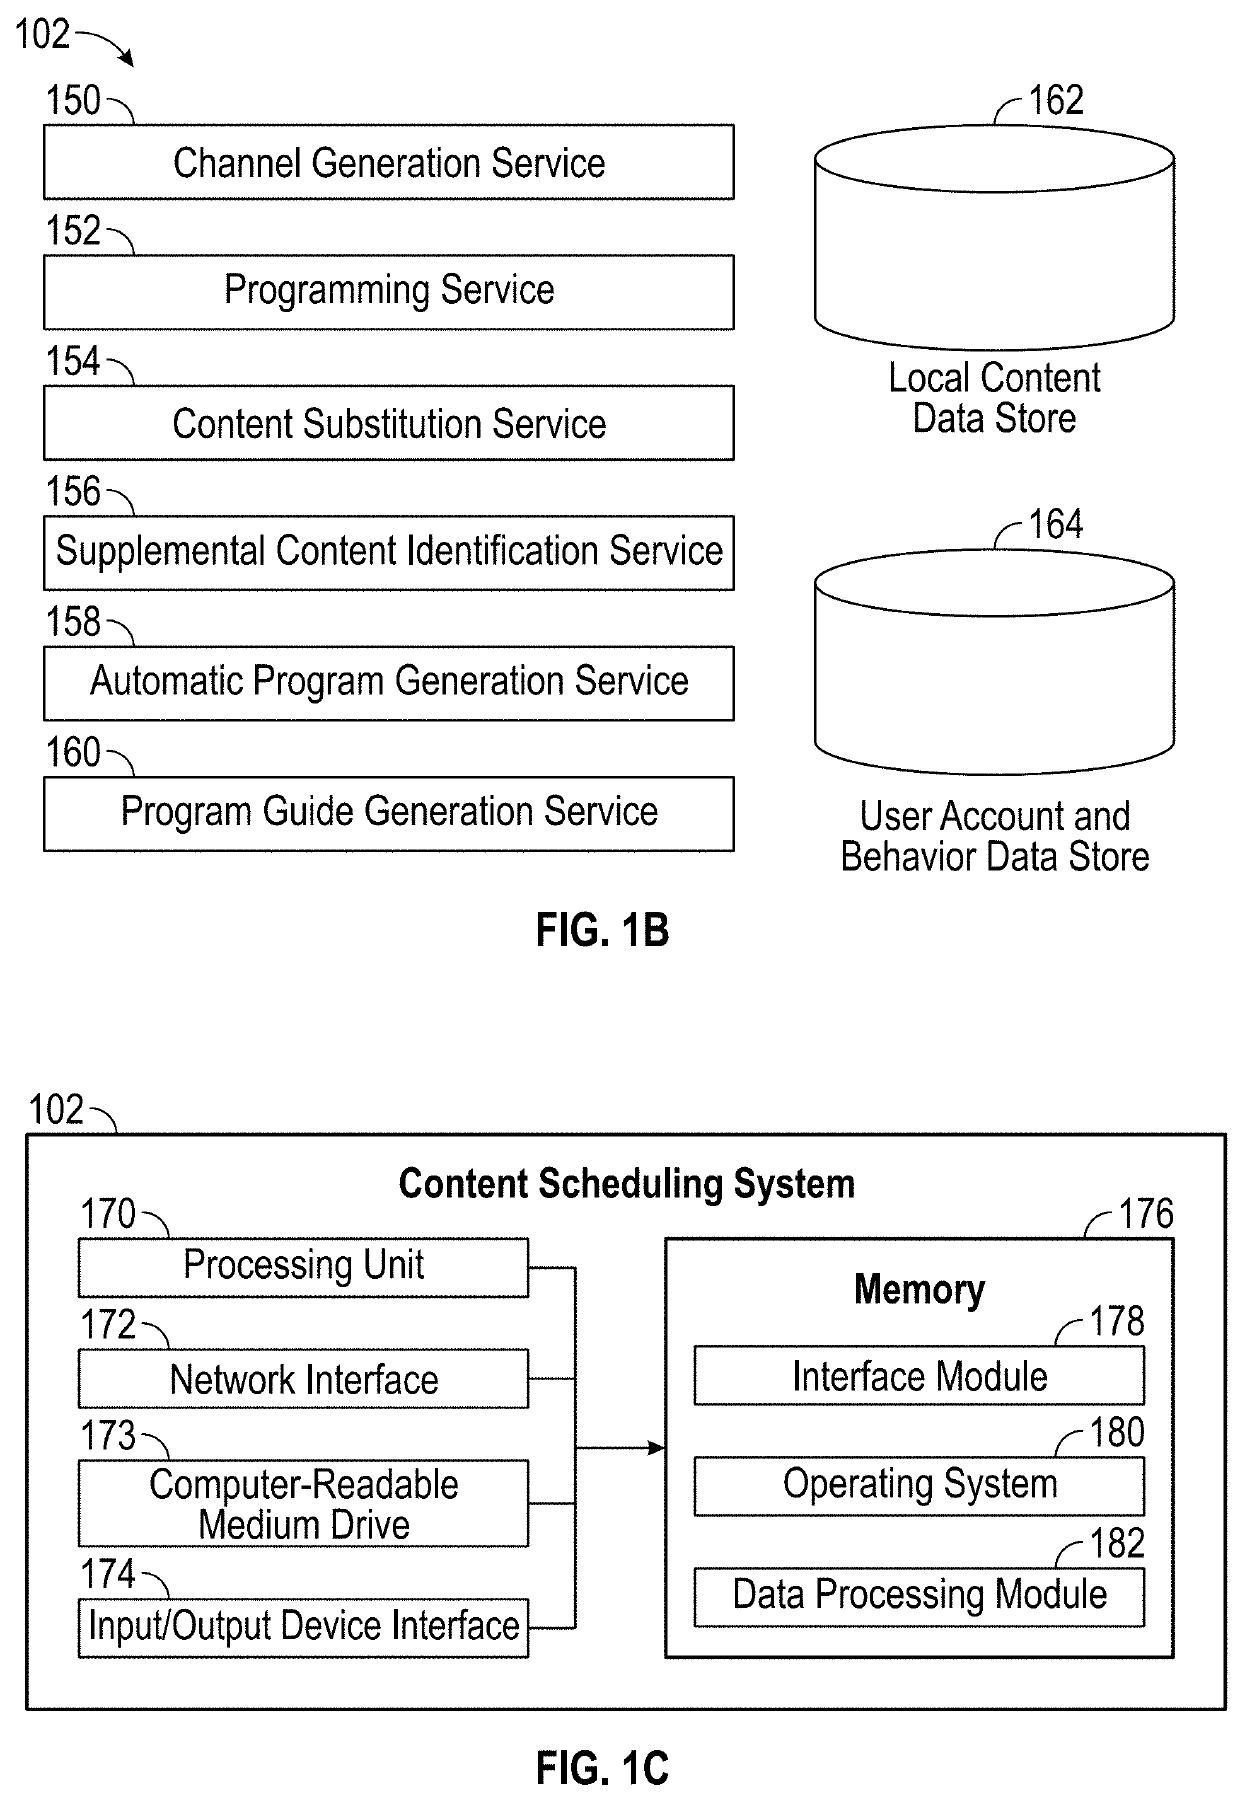 Methods and systems for generating and providing program guides and content